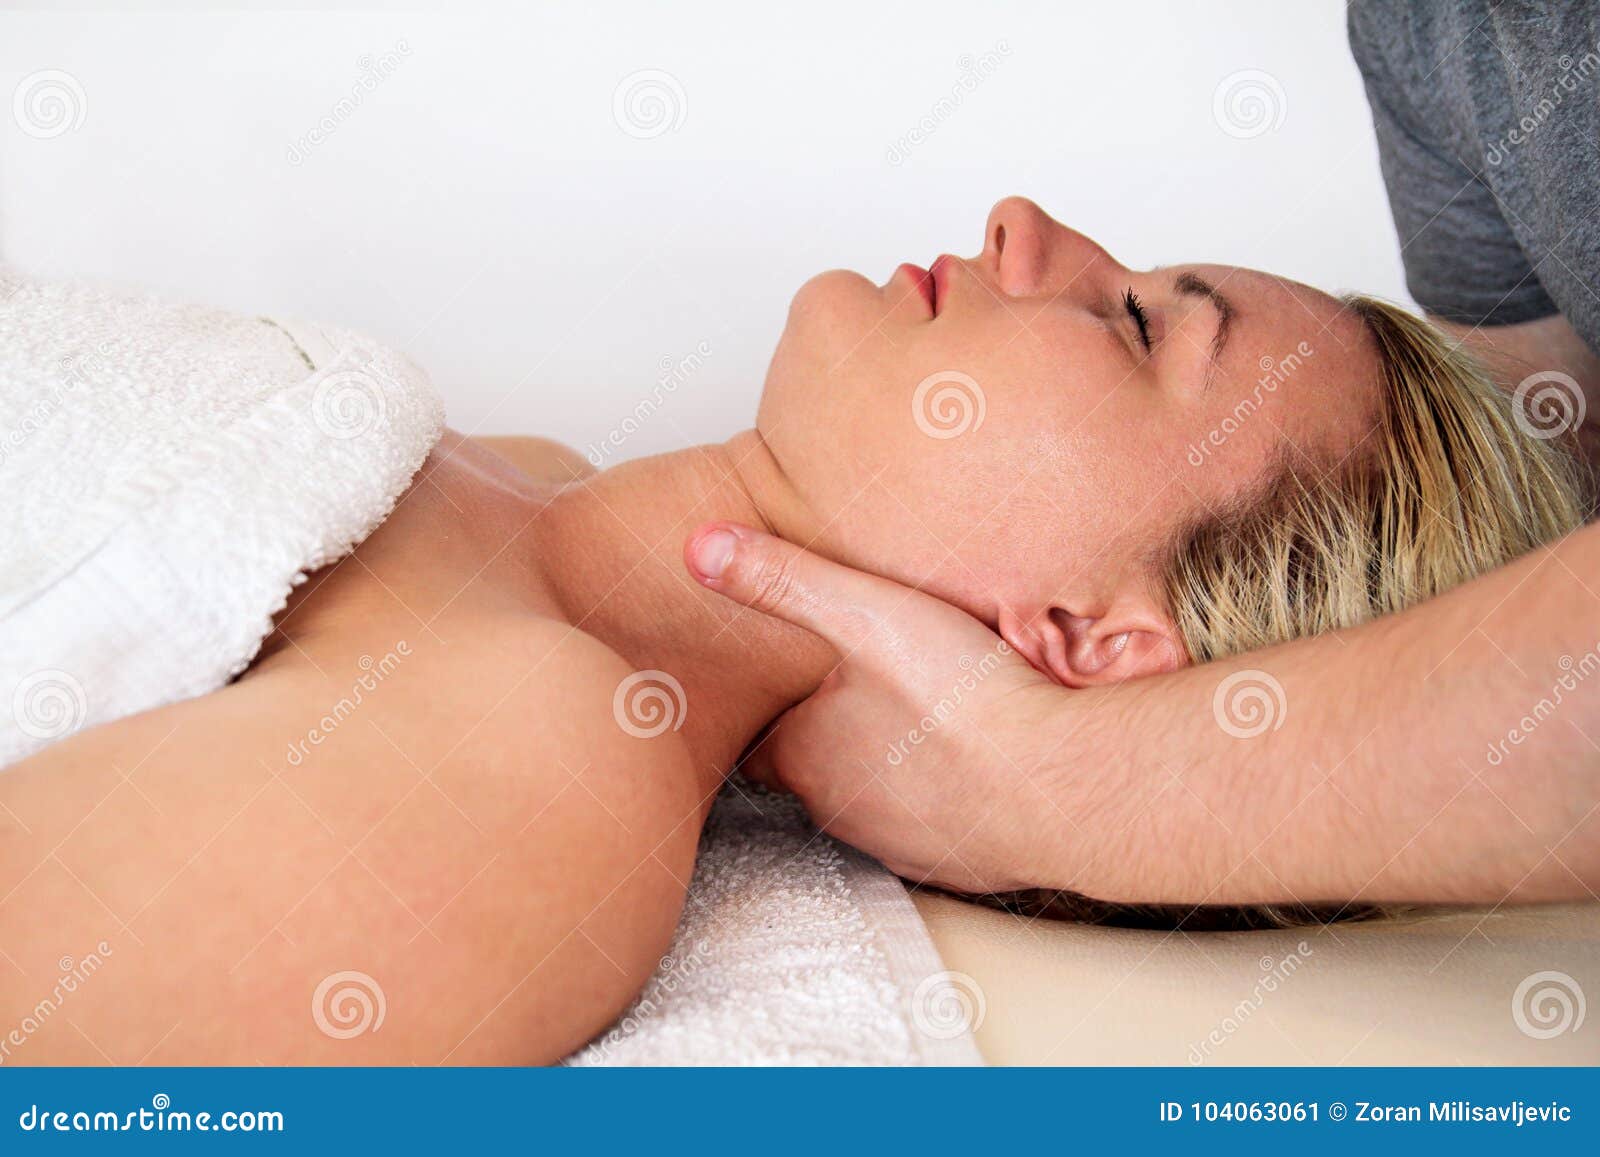 https://thumbs.dreamstime.com/z/woman-taking-massage-neck-muscles-table-relax-studio-body-care-spa-treatment-104063061.jpg